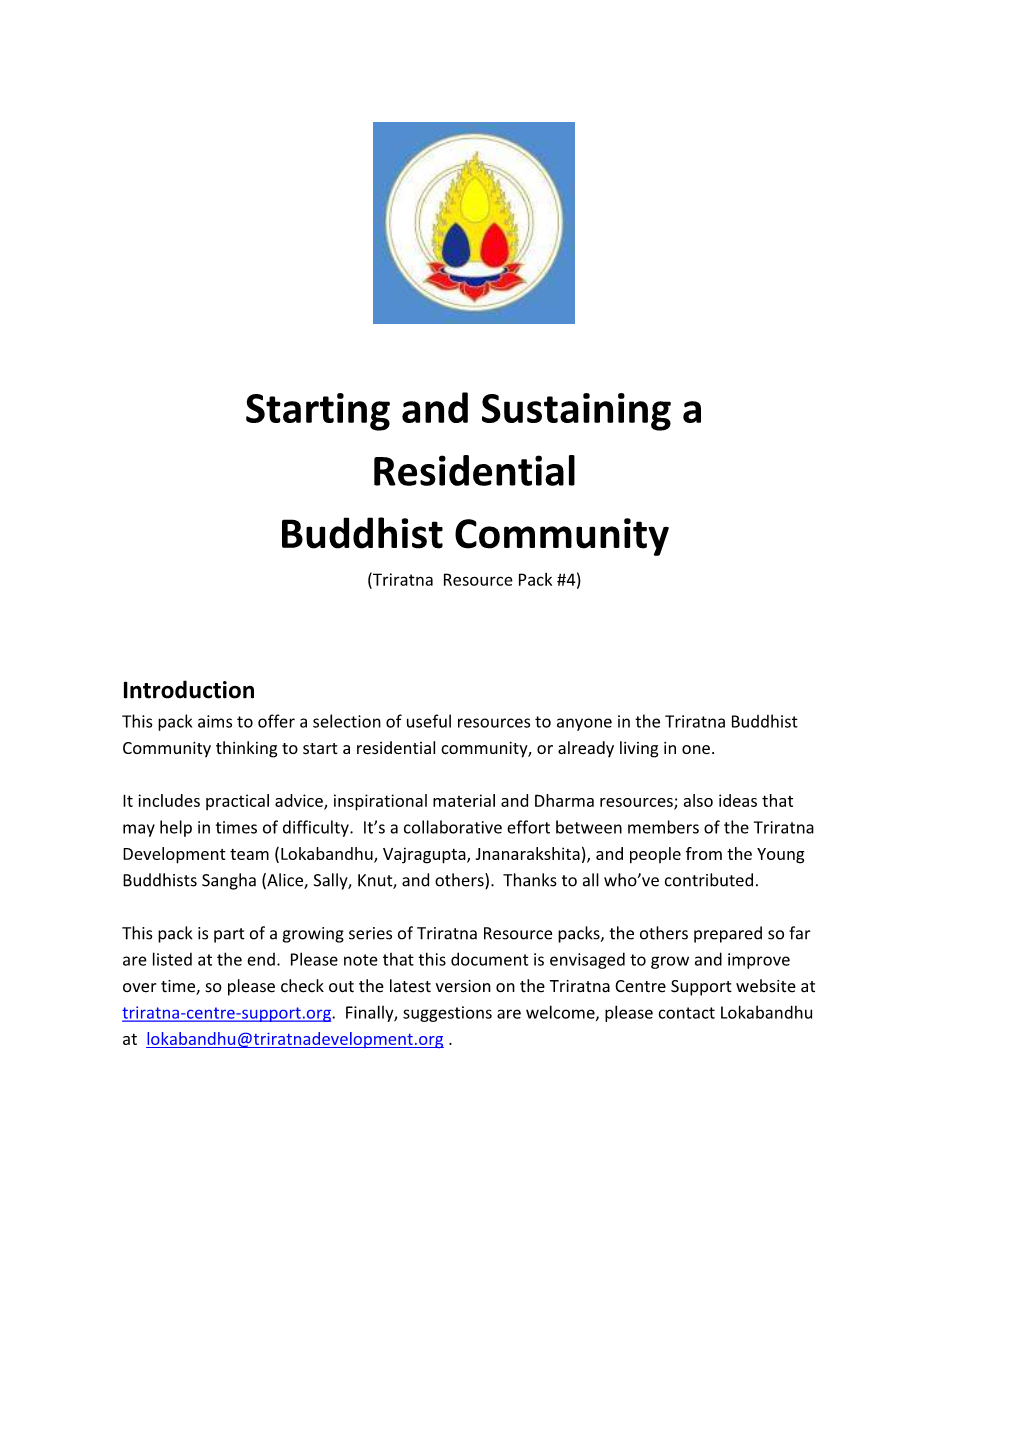 Starting and Sustaining a Residential Buddhist Community (Triratna Resource Pack #4)